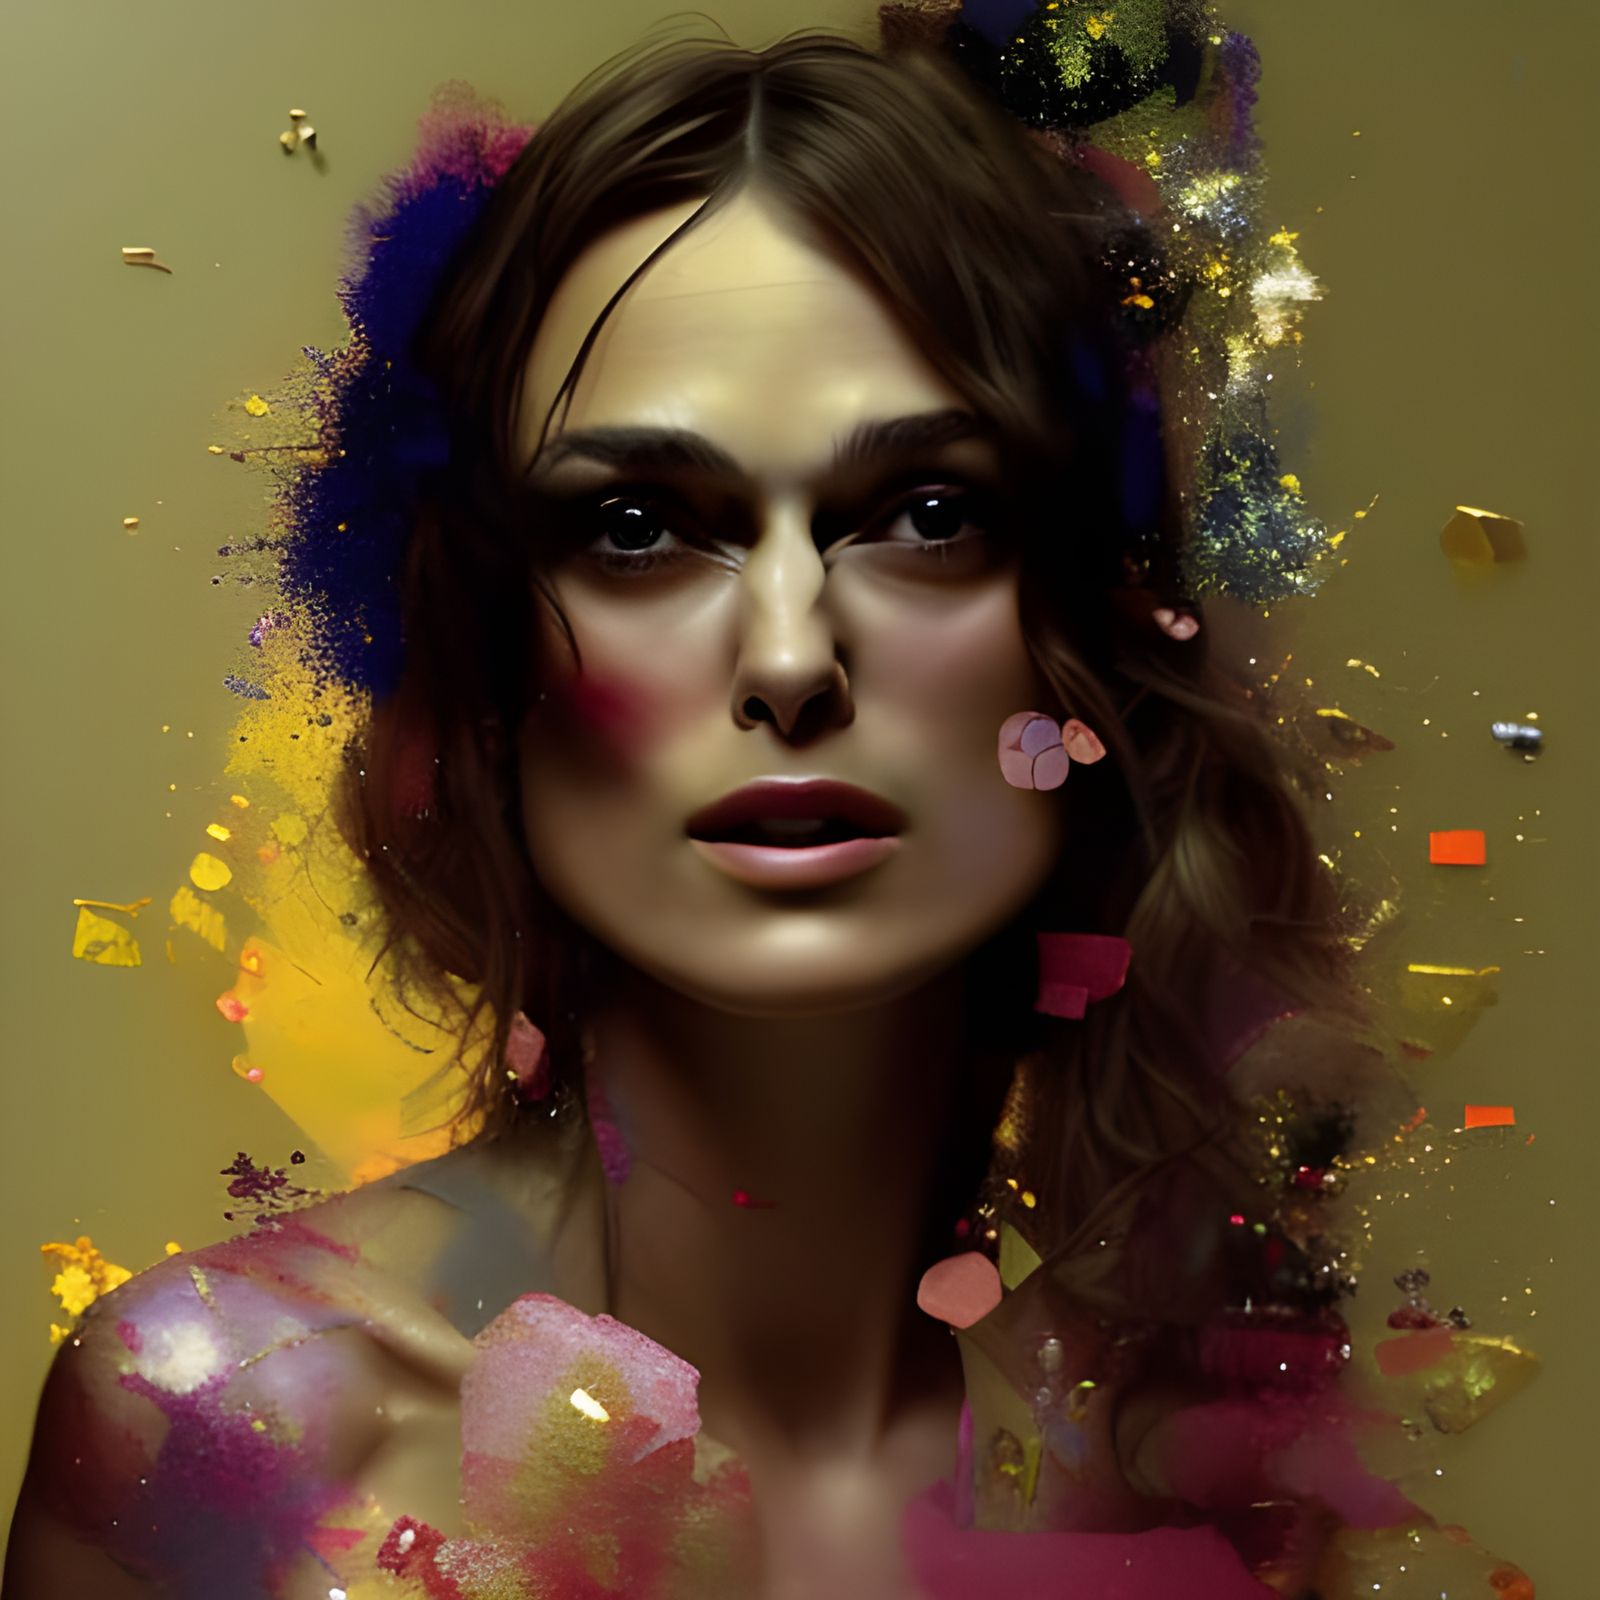 Keira Knightley™©®, Masterplayer, unofficial #1 - AI Generated Artwork ...